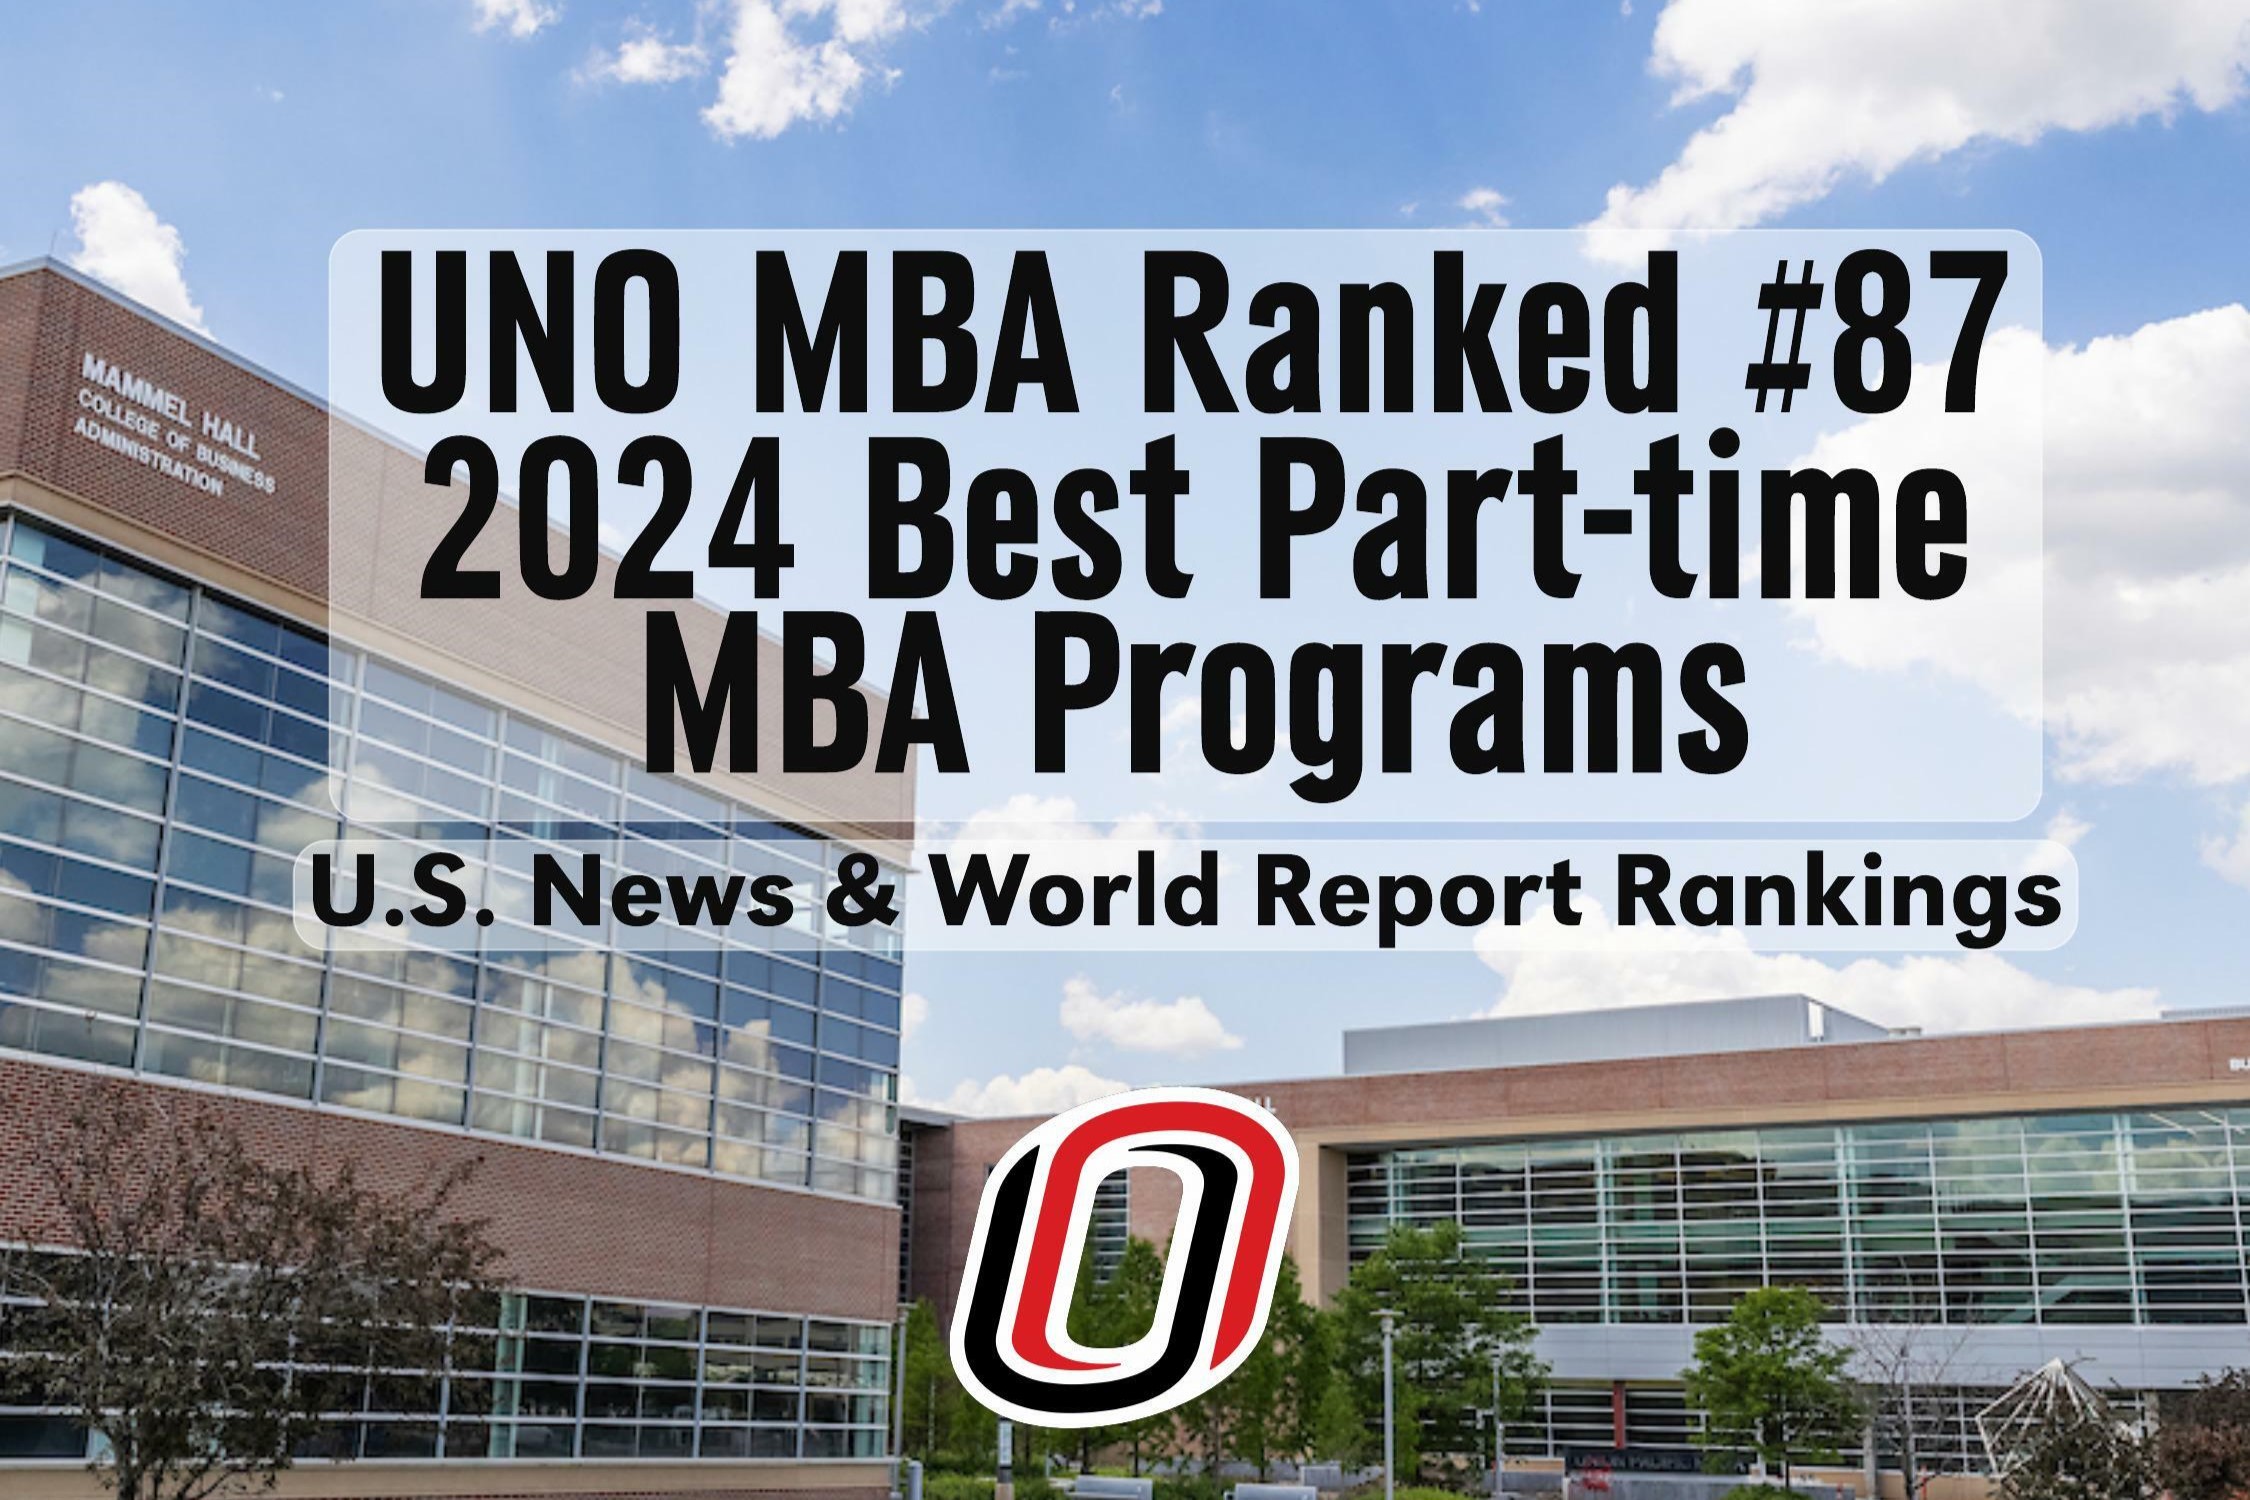 UNO MBA Ranked #87 2024 Best Part-time MBA Programs. U.S. News & World Report Rankings